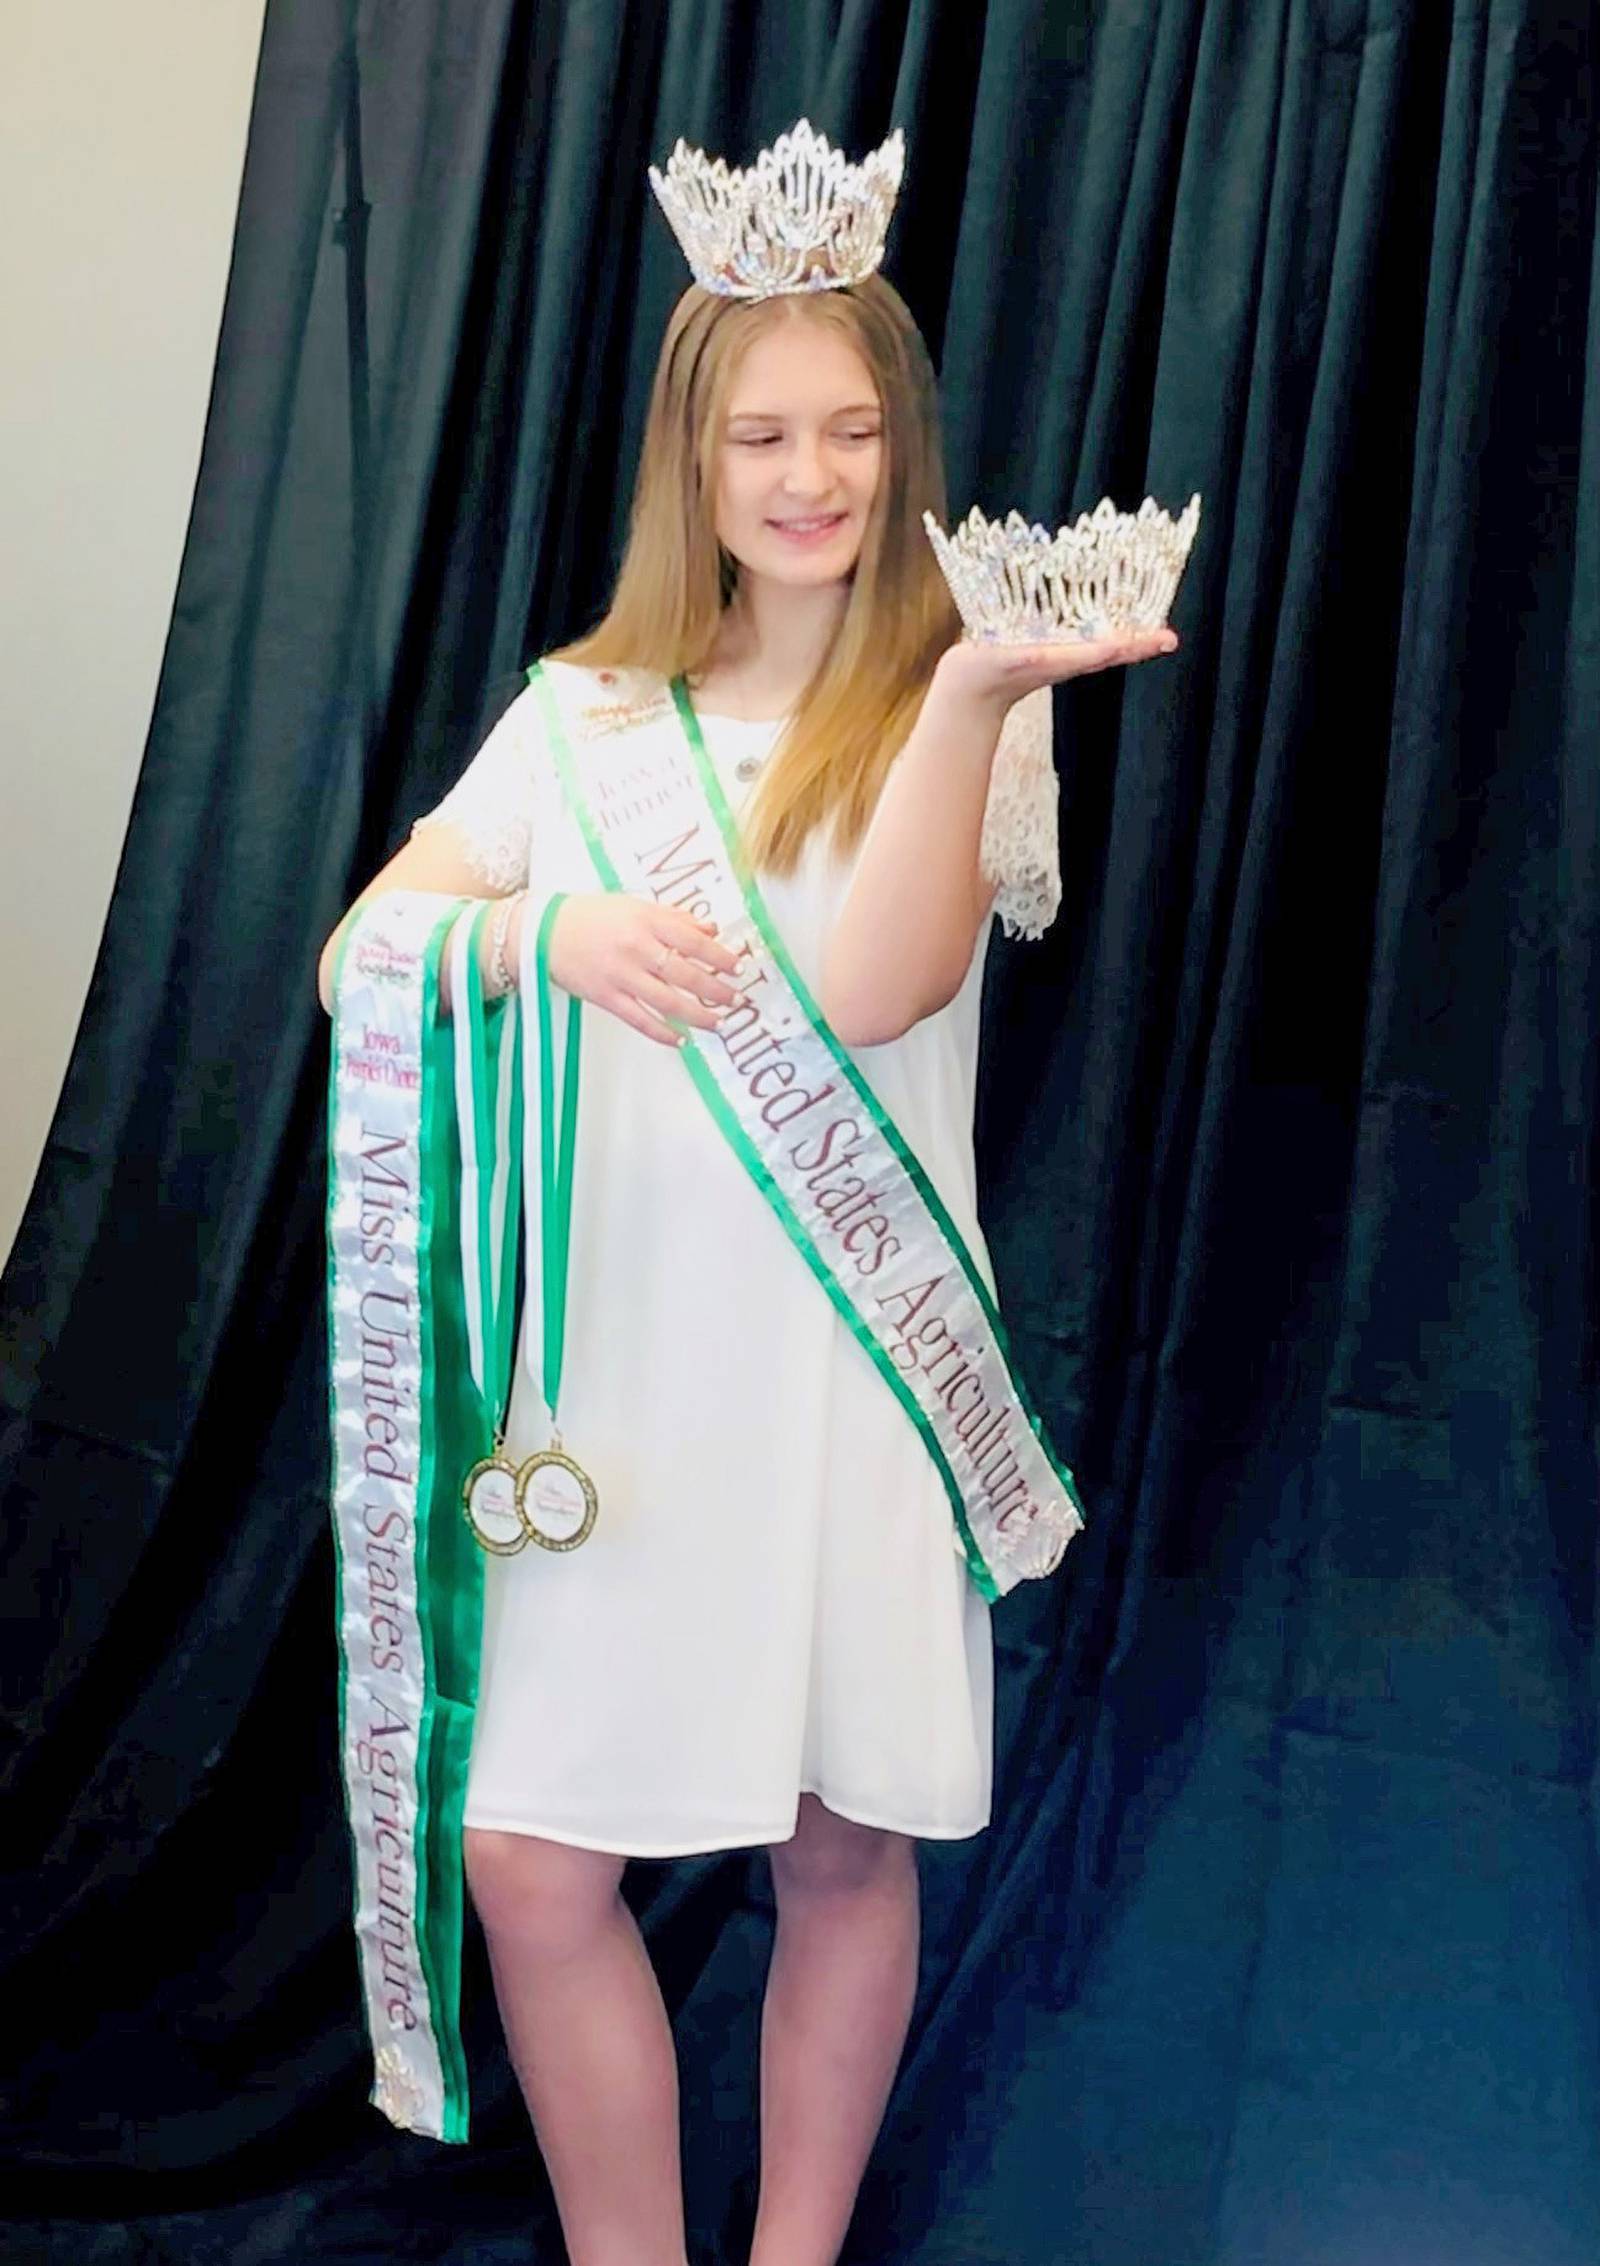 Newton youth wins two titles at 2021 Miss United States Agriculture